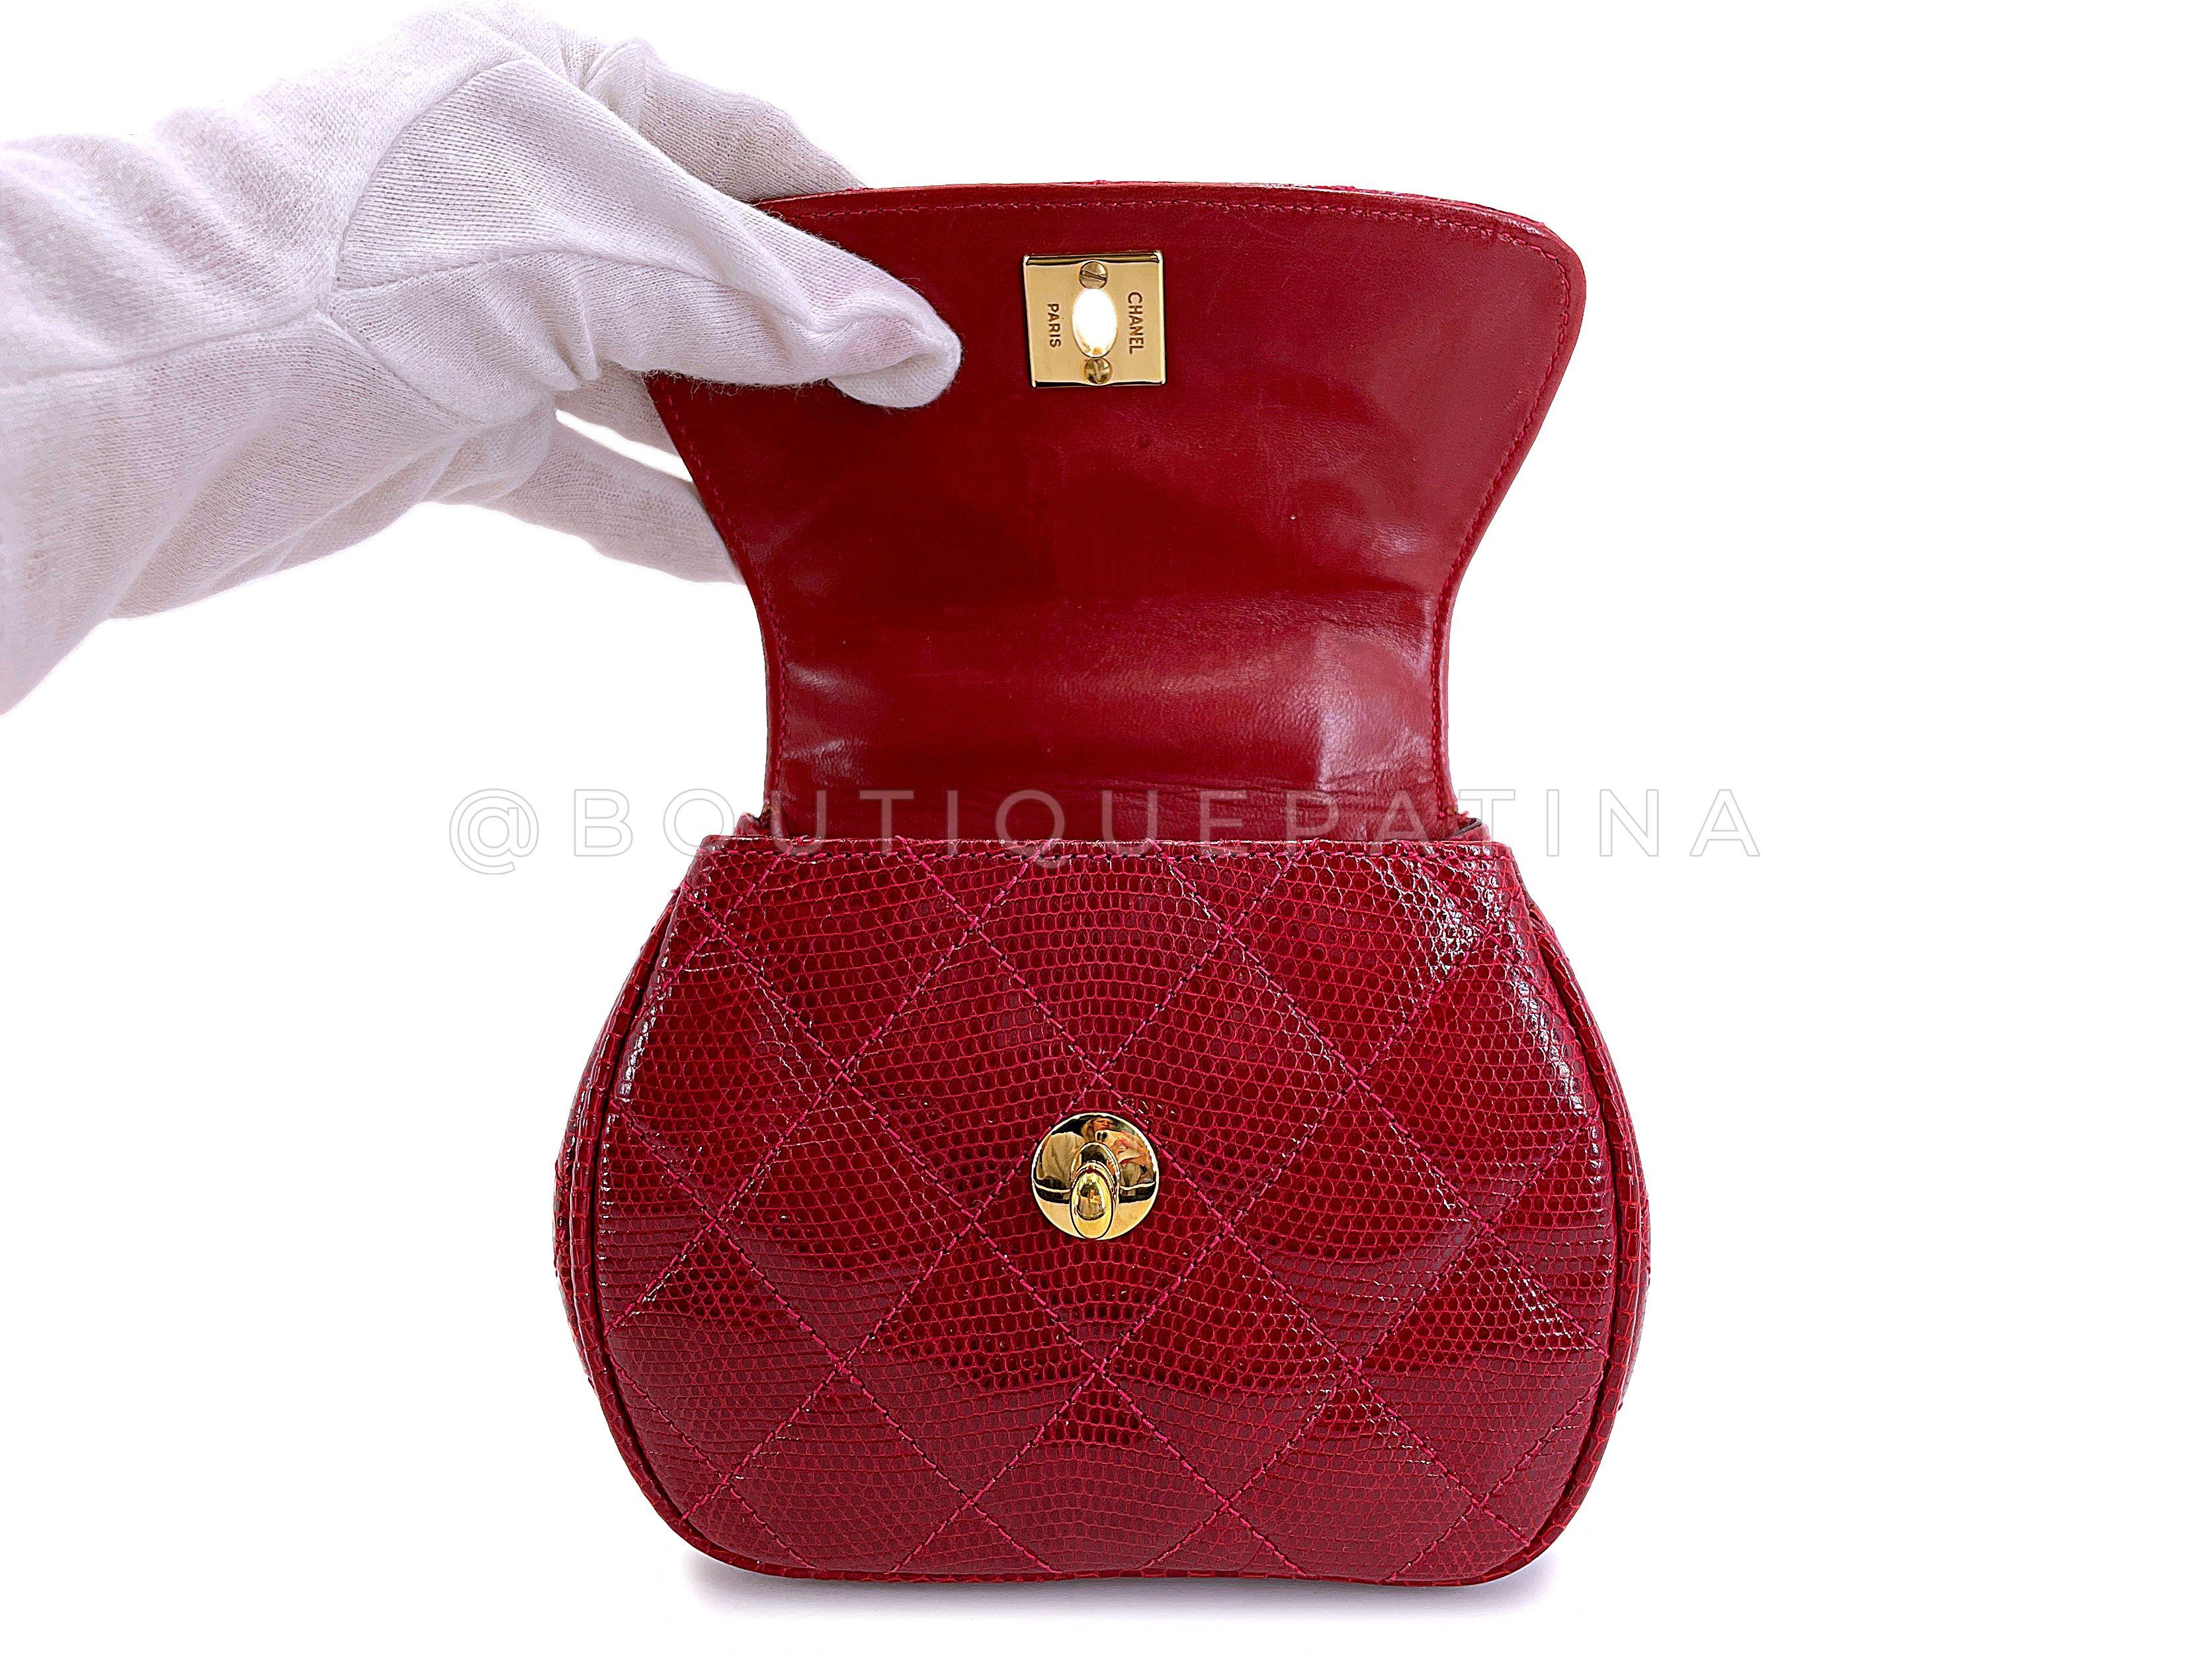 Rare Chanel 1980s Vintage Red Lizard Etched Chain Round Mini Flap Bag 67290 For Sale 5